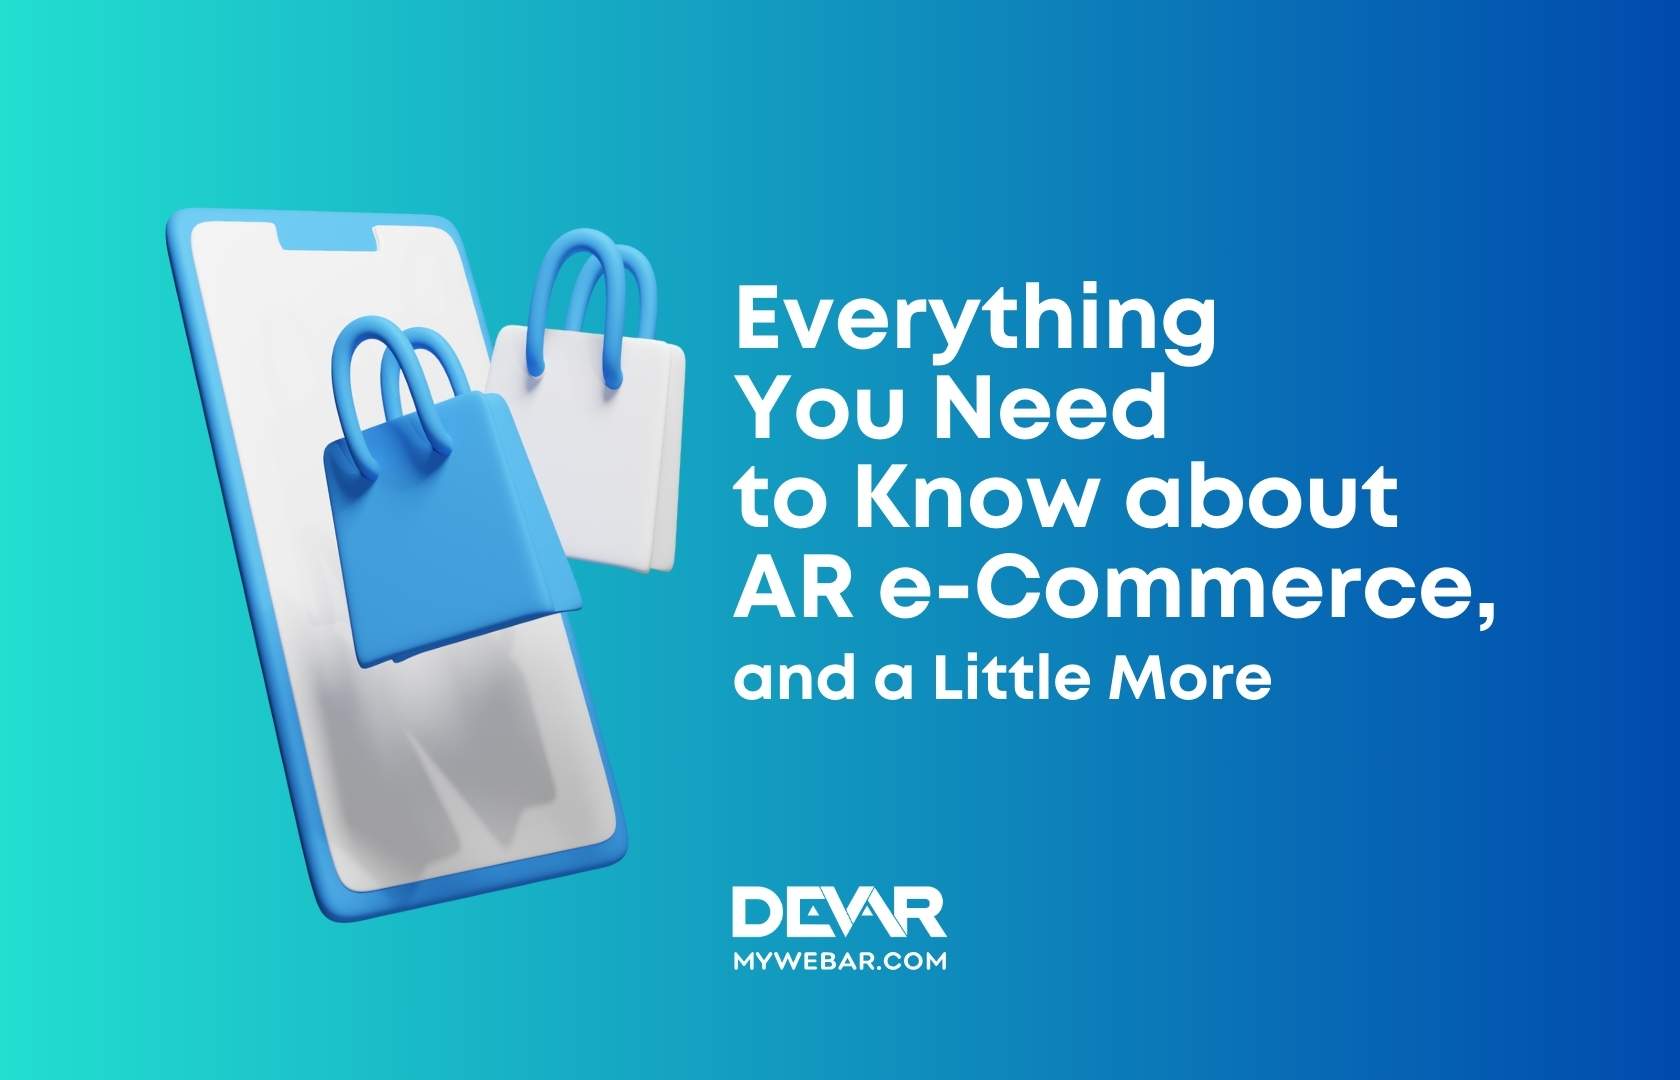 Everything You Need to Know about AR in e-Commerce, and a Little More